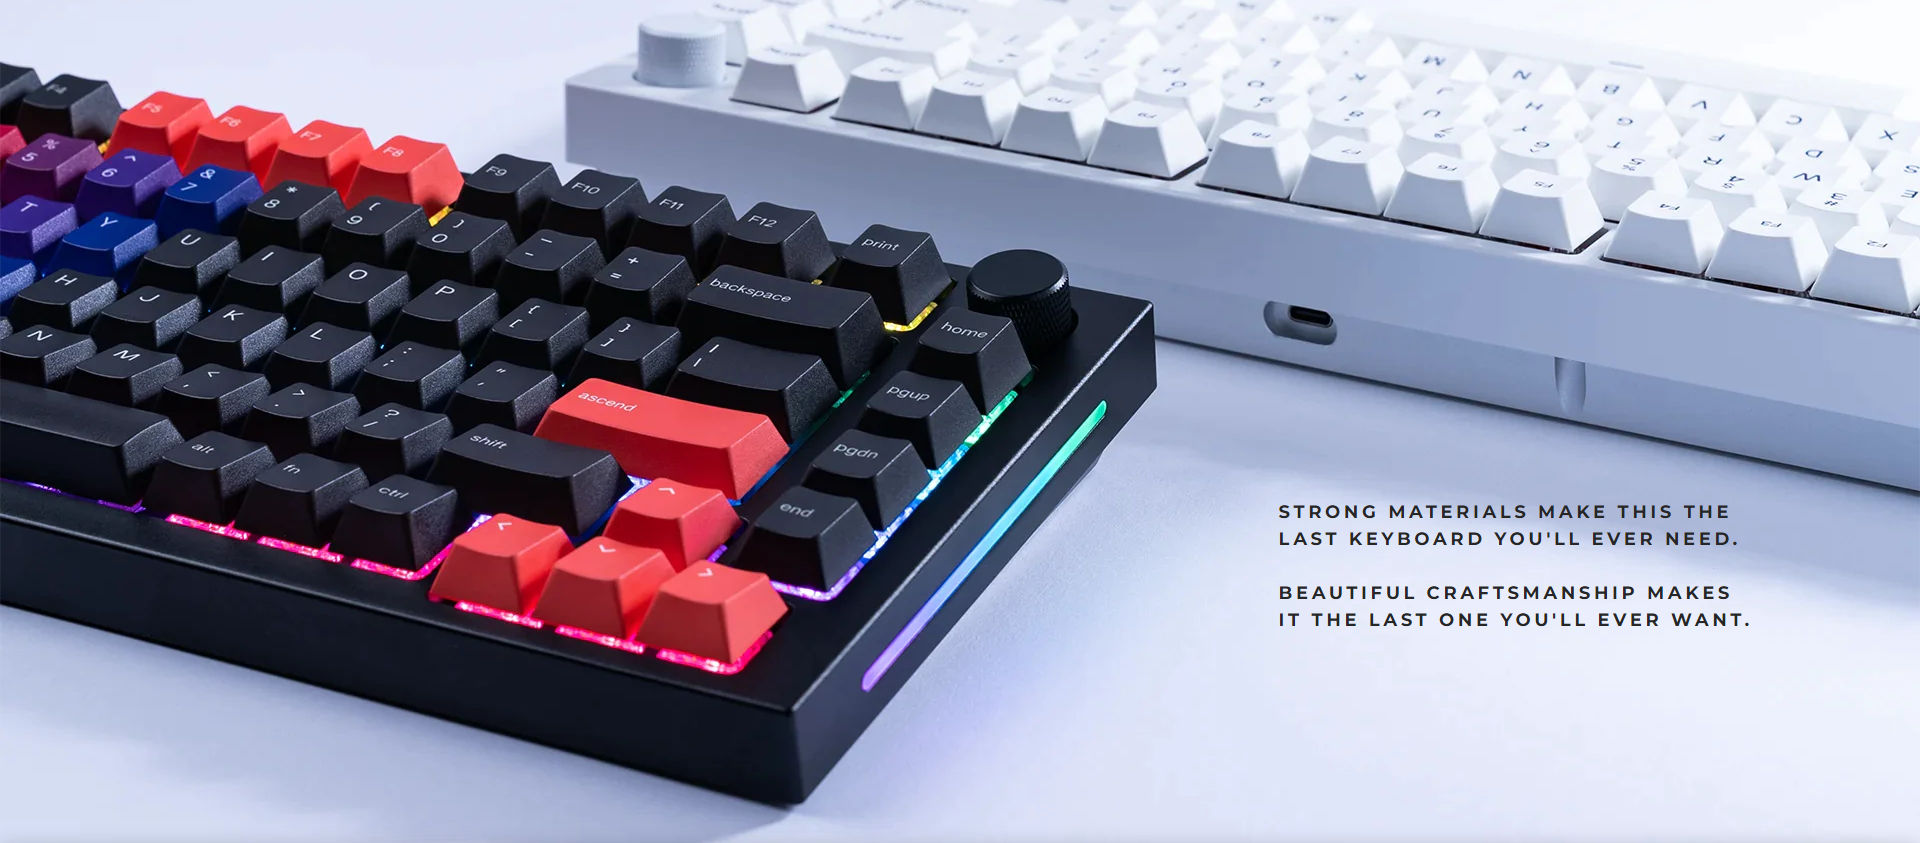 A large marketing image providing additional information about the product Glorious GMMK Pro 75% Mechanical Keyboard - Black Slate (Prebuilt) - Additional alt info not provided